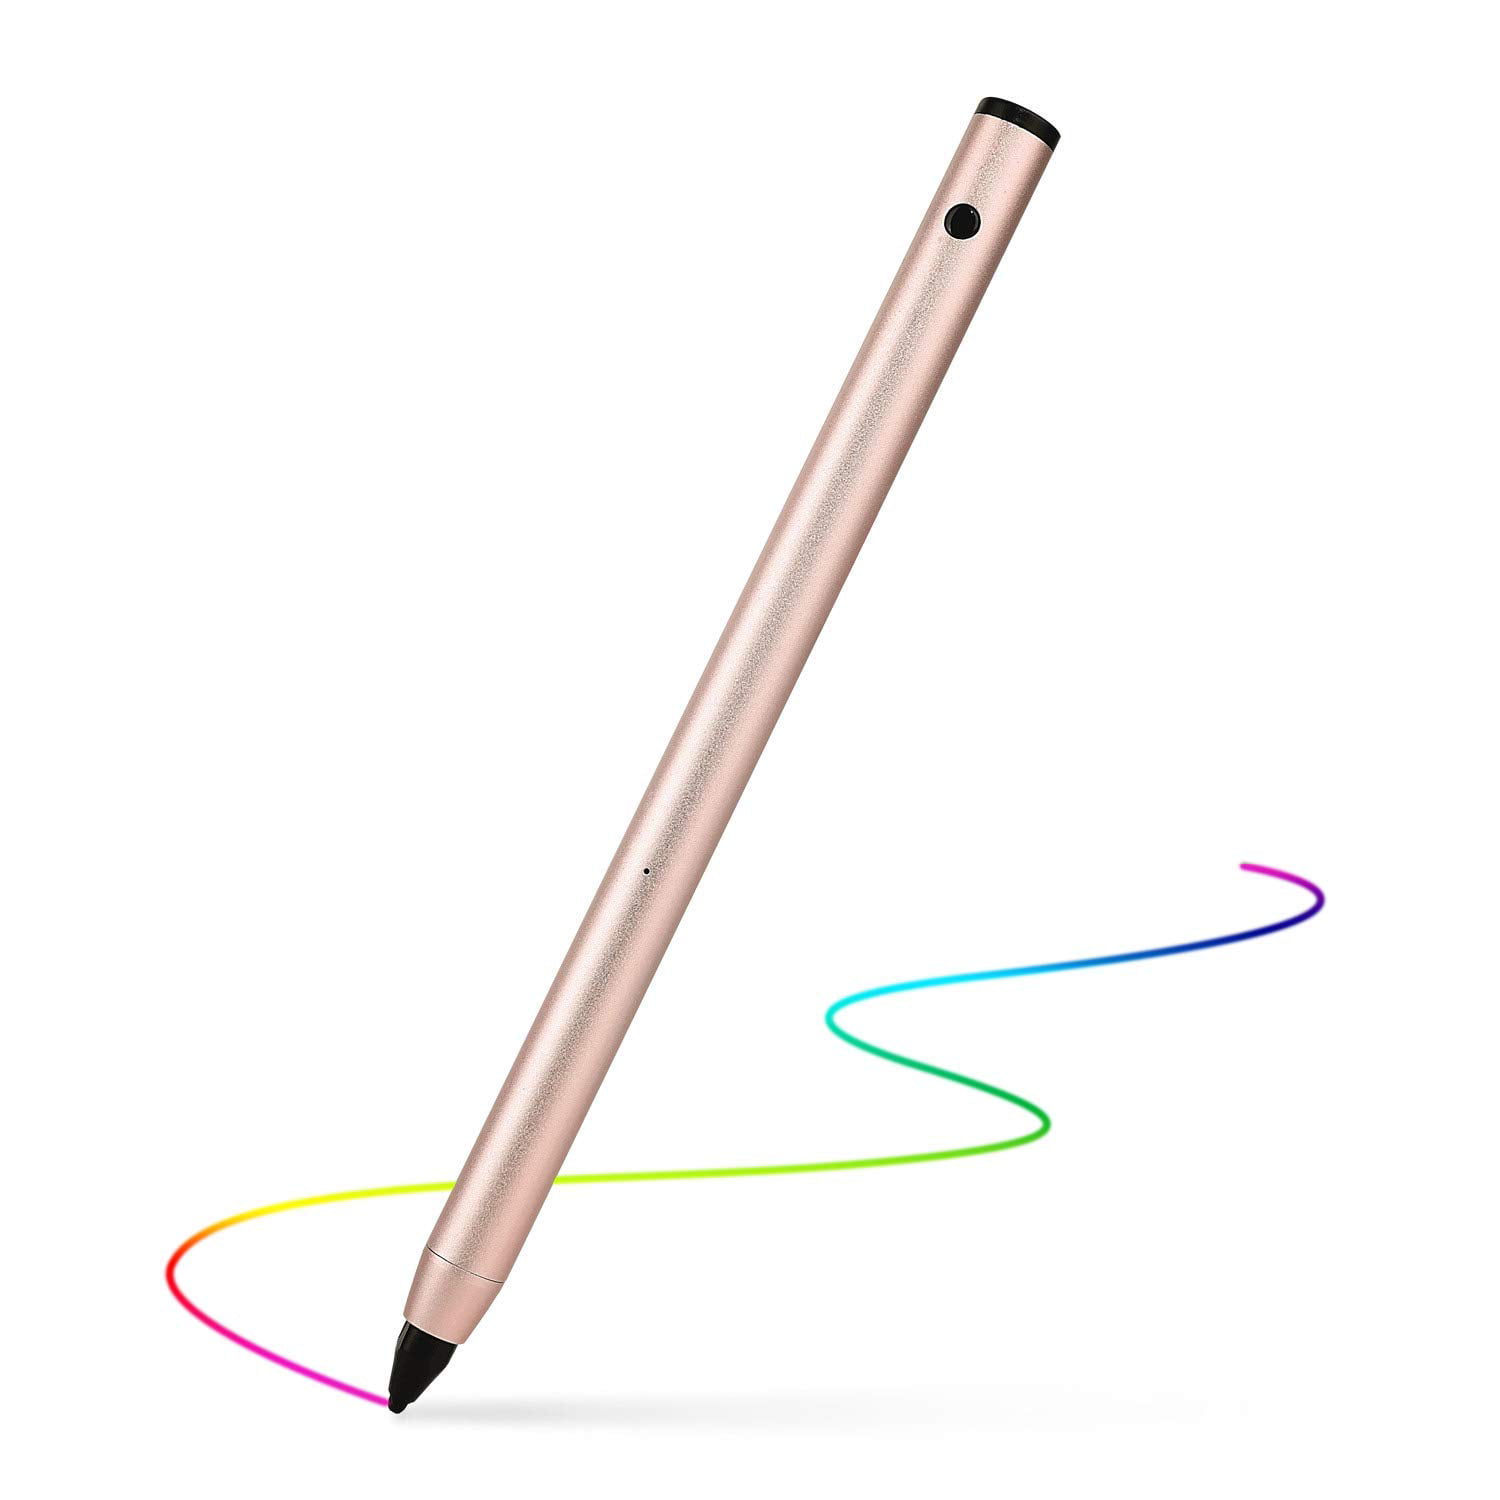 Active Stylus Pen Fine Tip Active Capacitive Stylus for Touch Screen 1.9mm Ultra Fine Tip Compatibility iPhone/iPad/Android and Touchscreen Devices Rechargeable Digital Pen